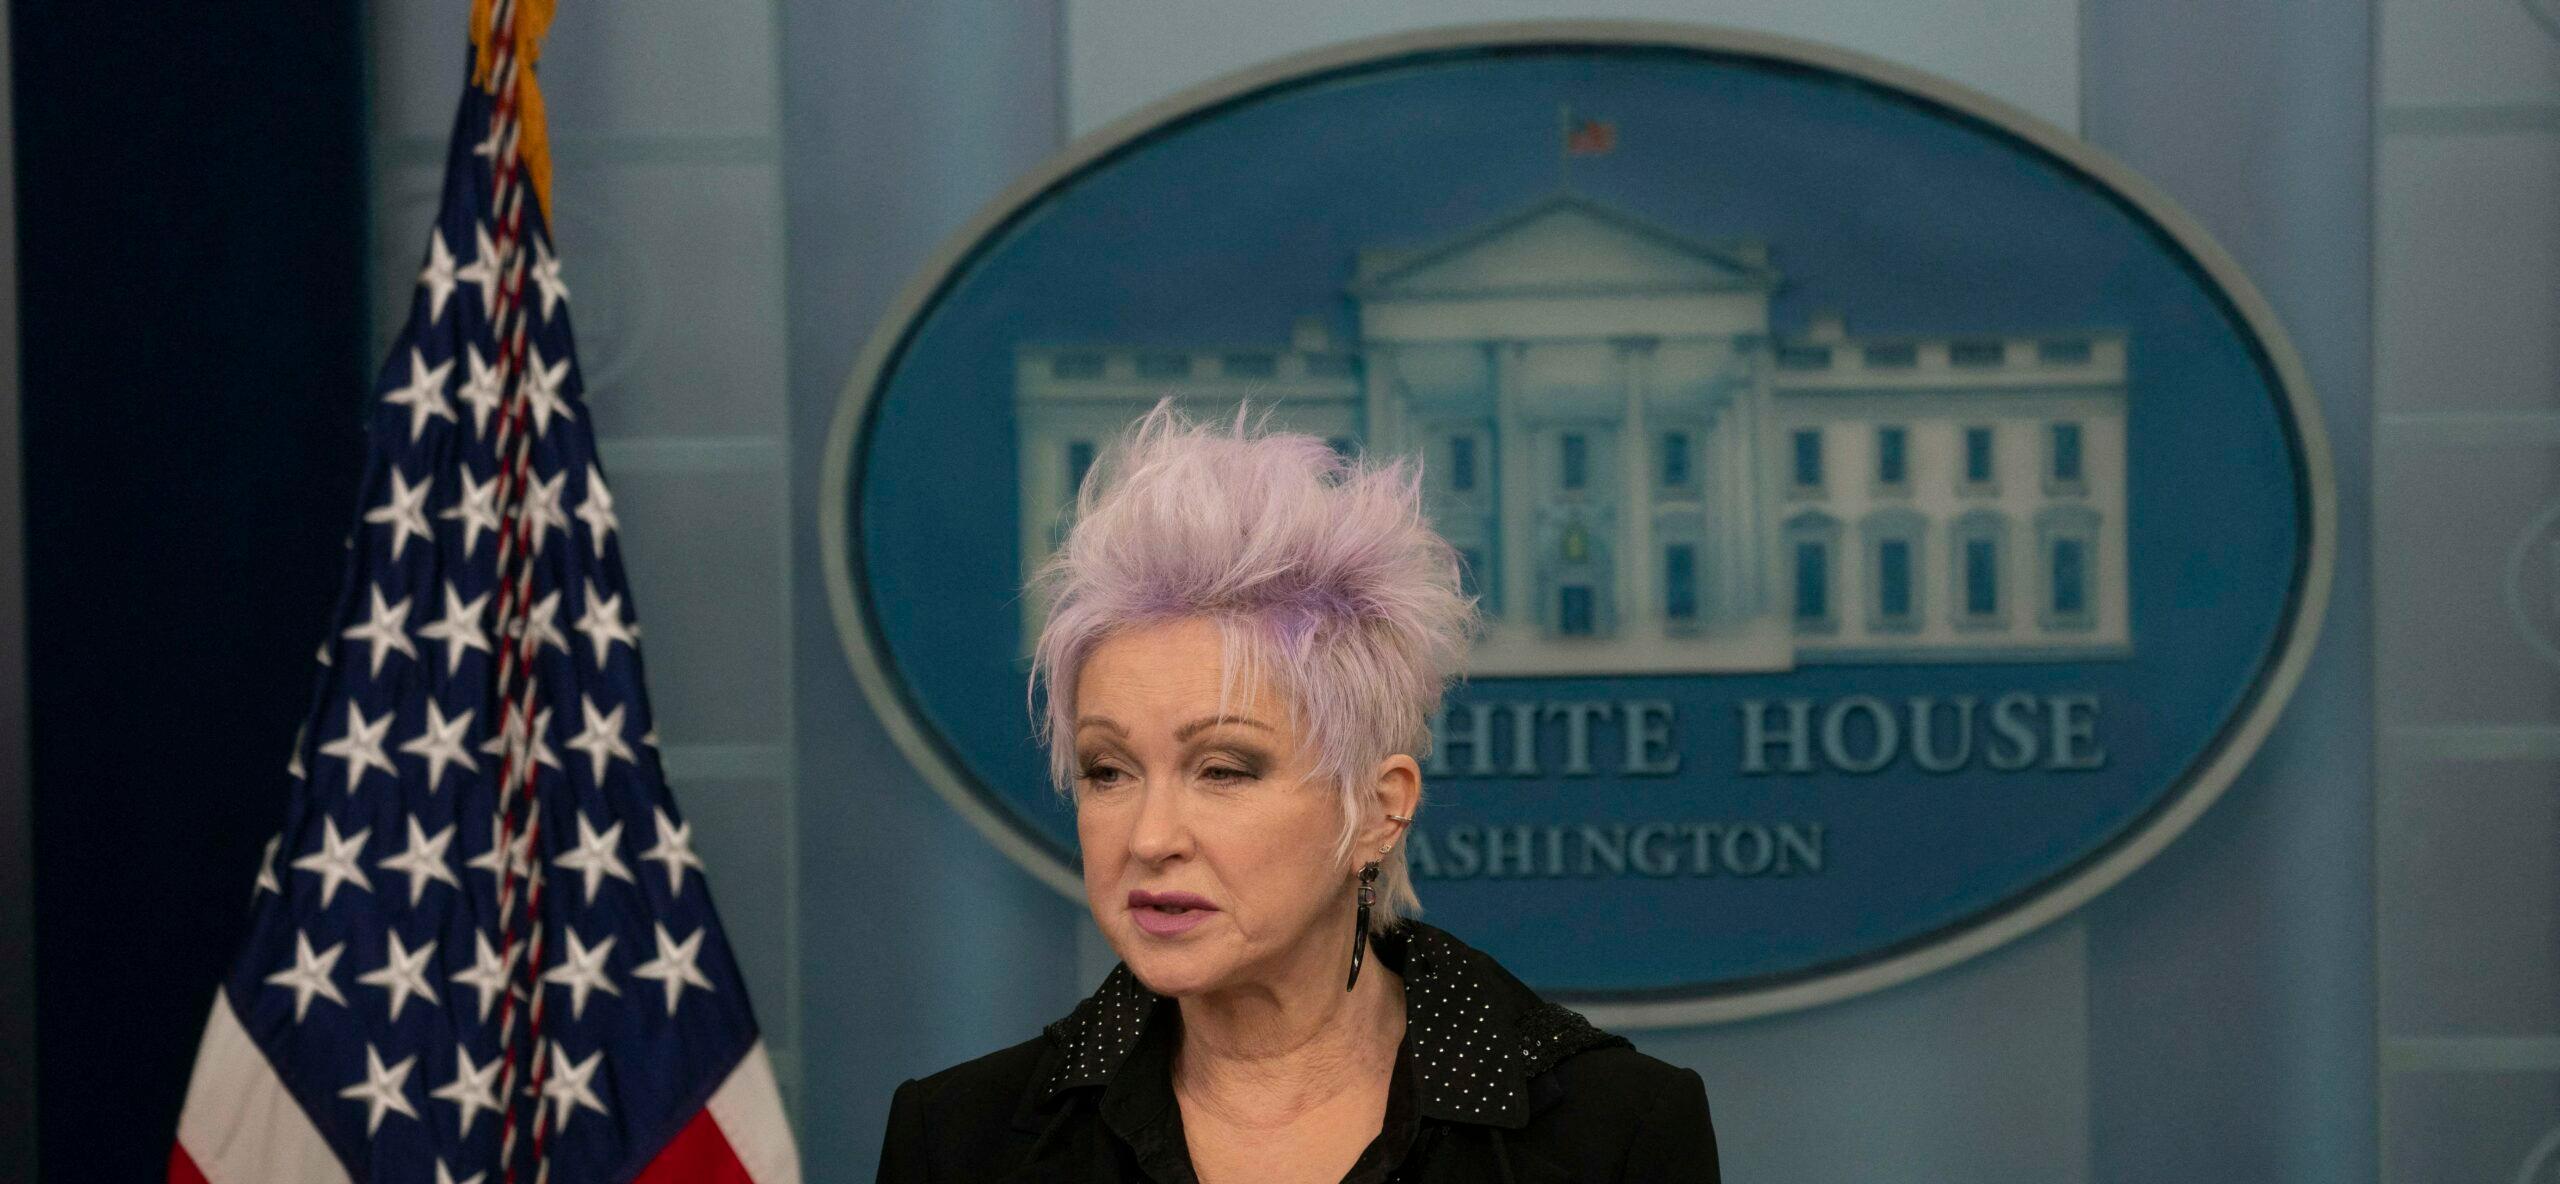 Musician Cyndi Lauper makes a statement in the briefing room